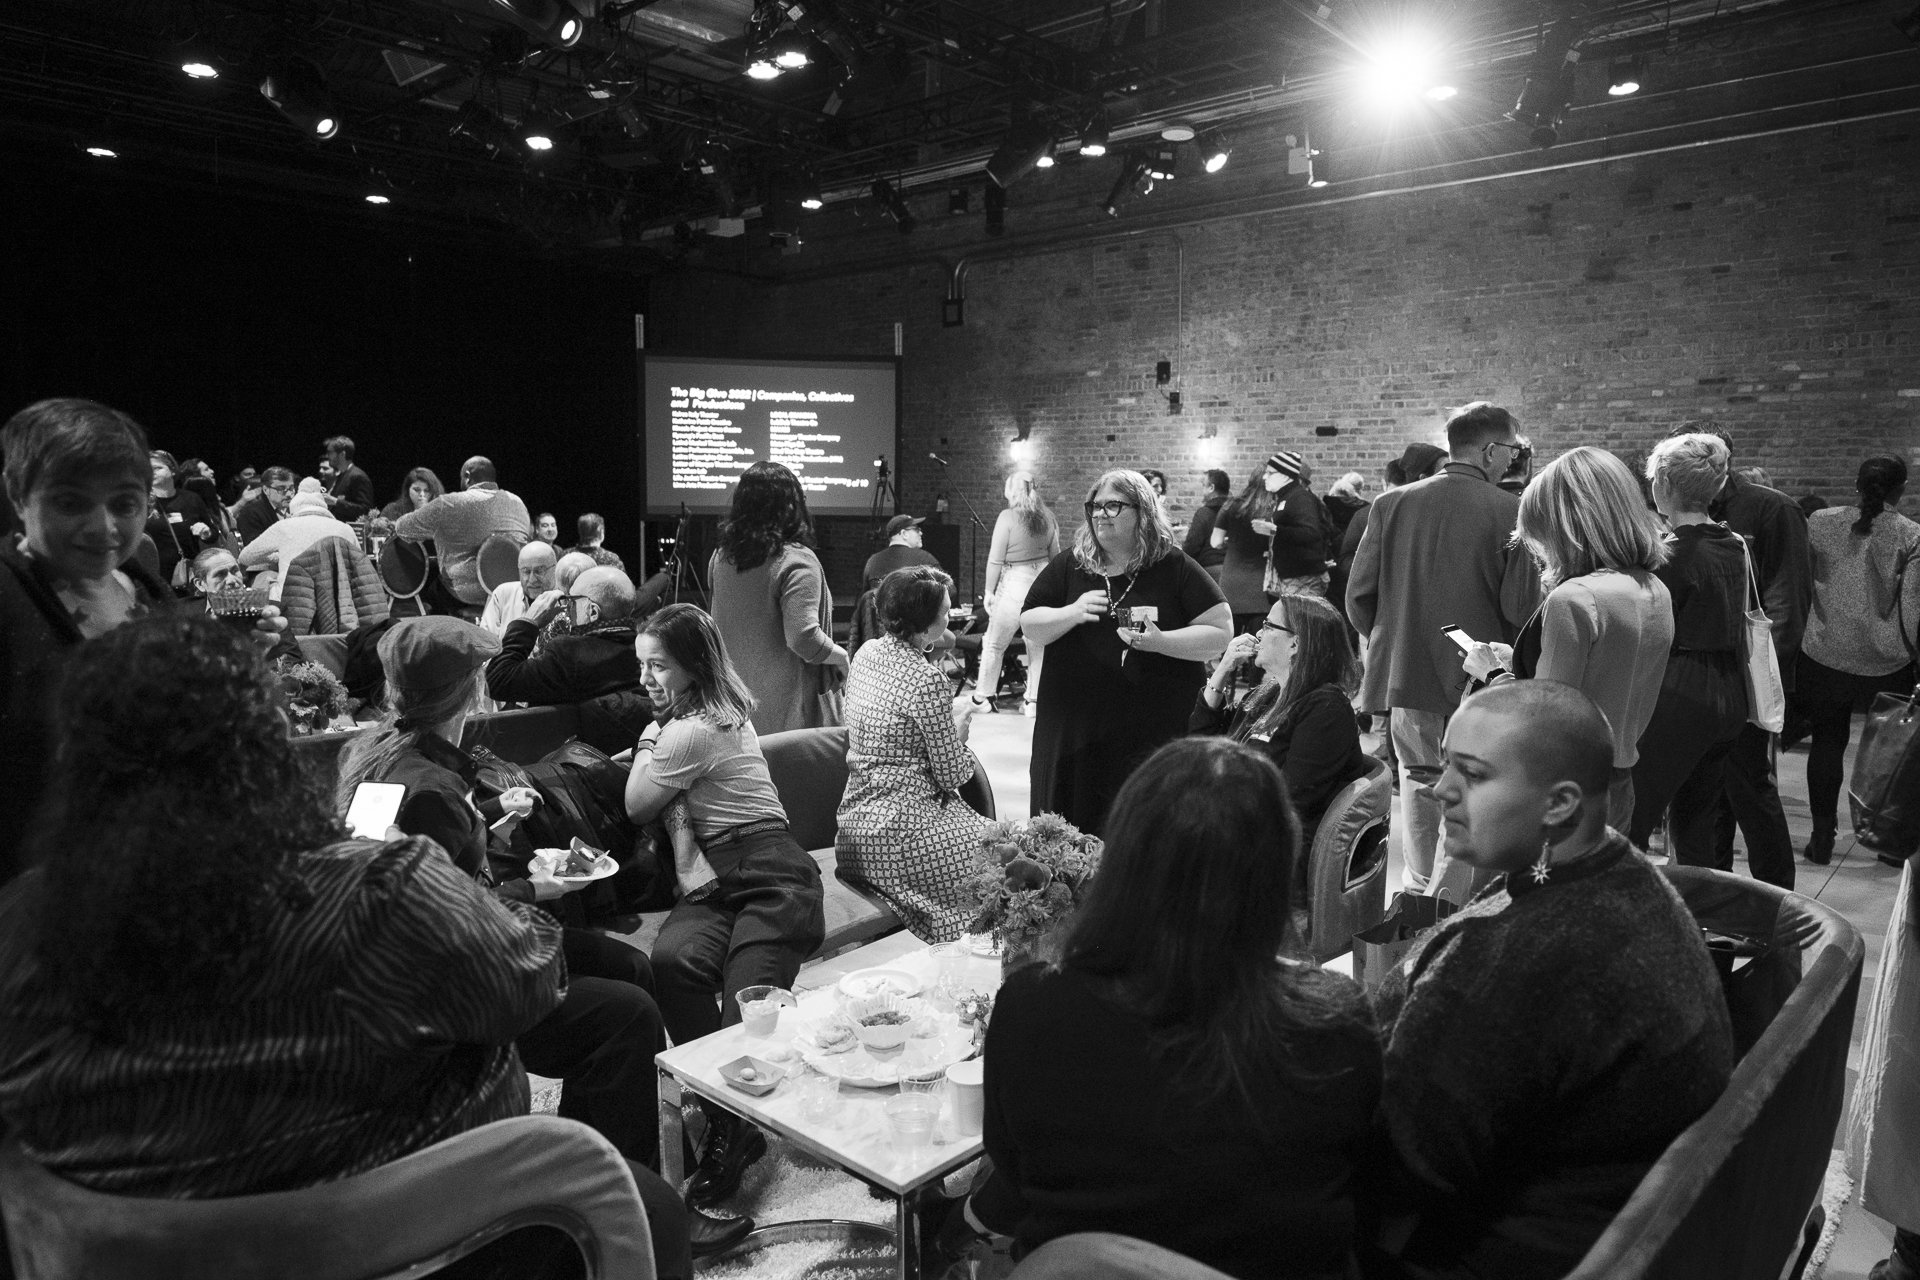  A black and white image from the night that indie space received the grant  